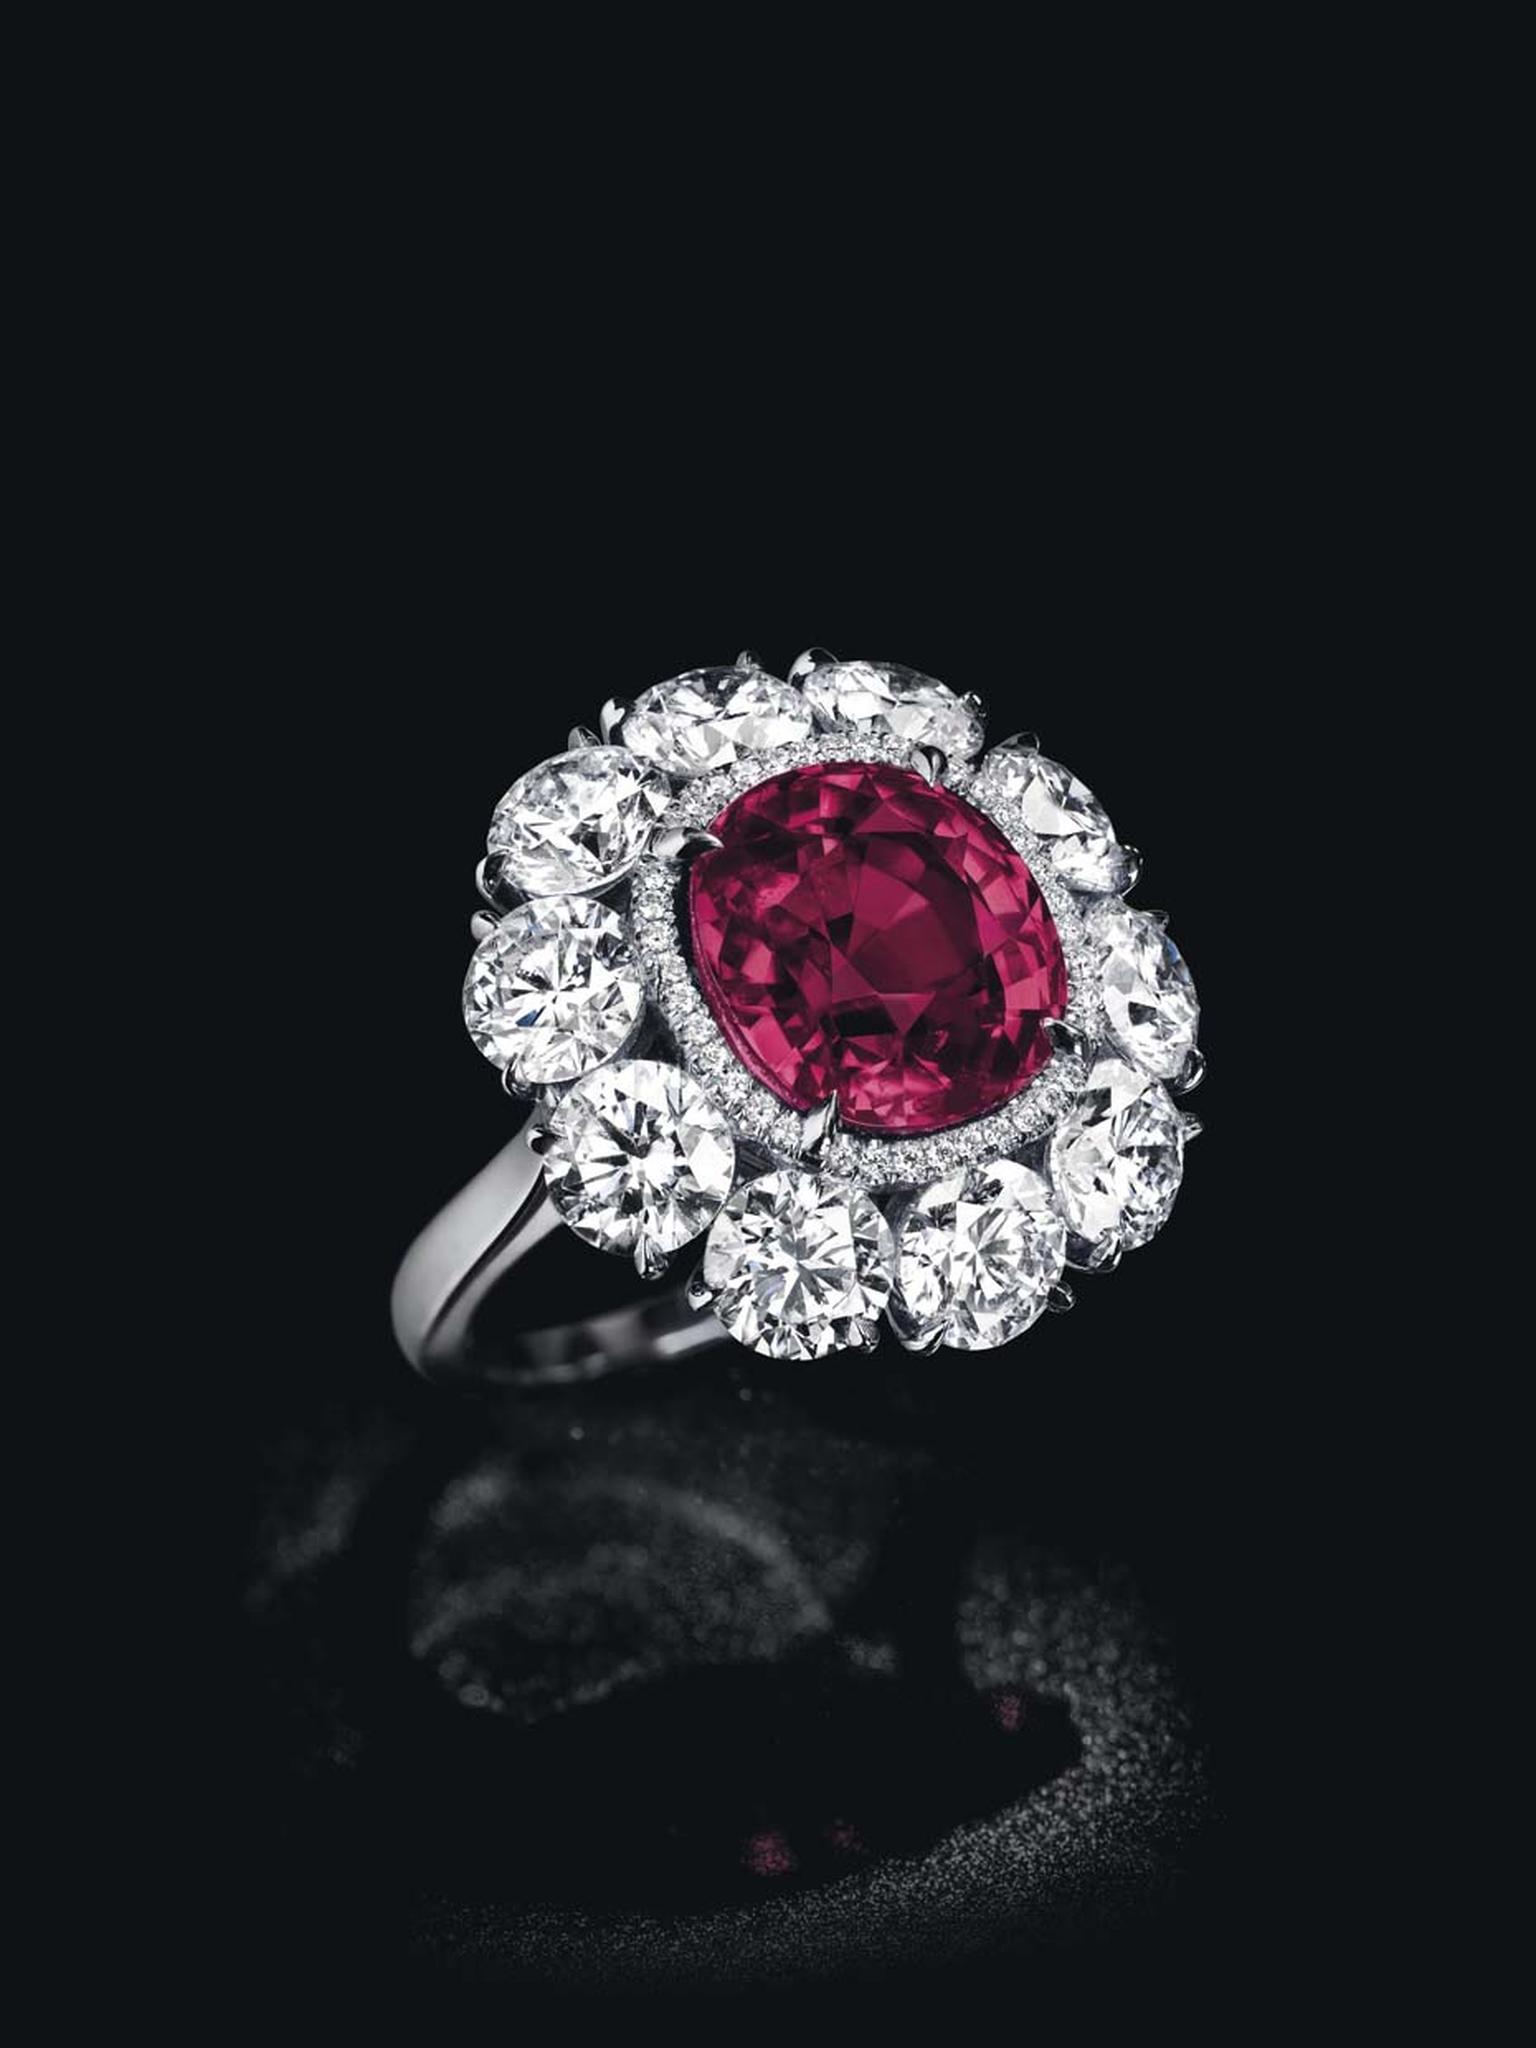 The hammer fell at $3.14 million for this cushion-shaped Burmese ruby and diamond ring, known as the Pride of Burma, at Christie's Magnificent Jewels Sale in Geneva.